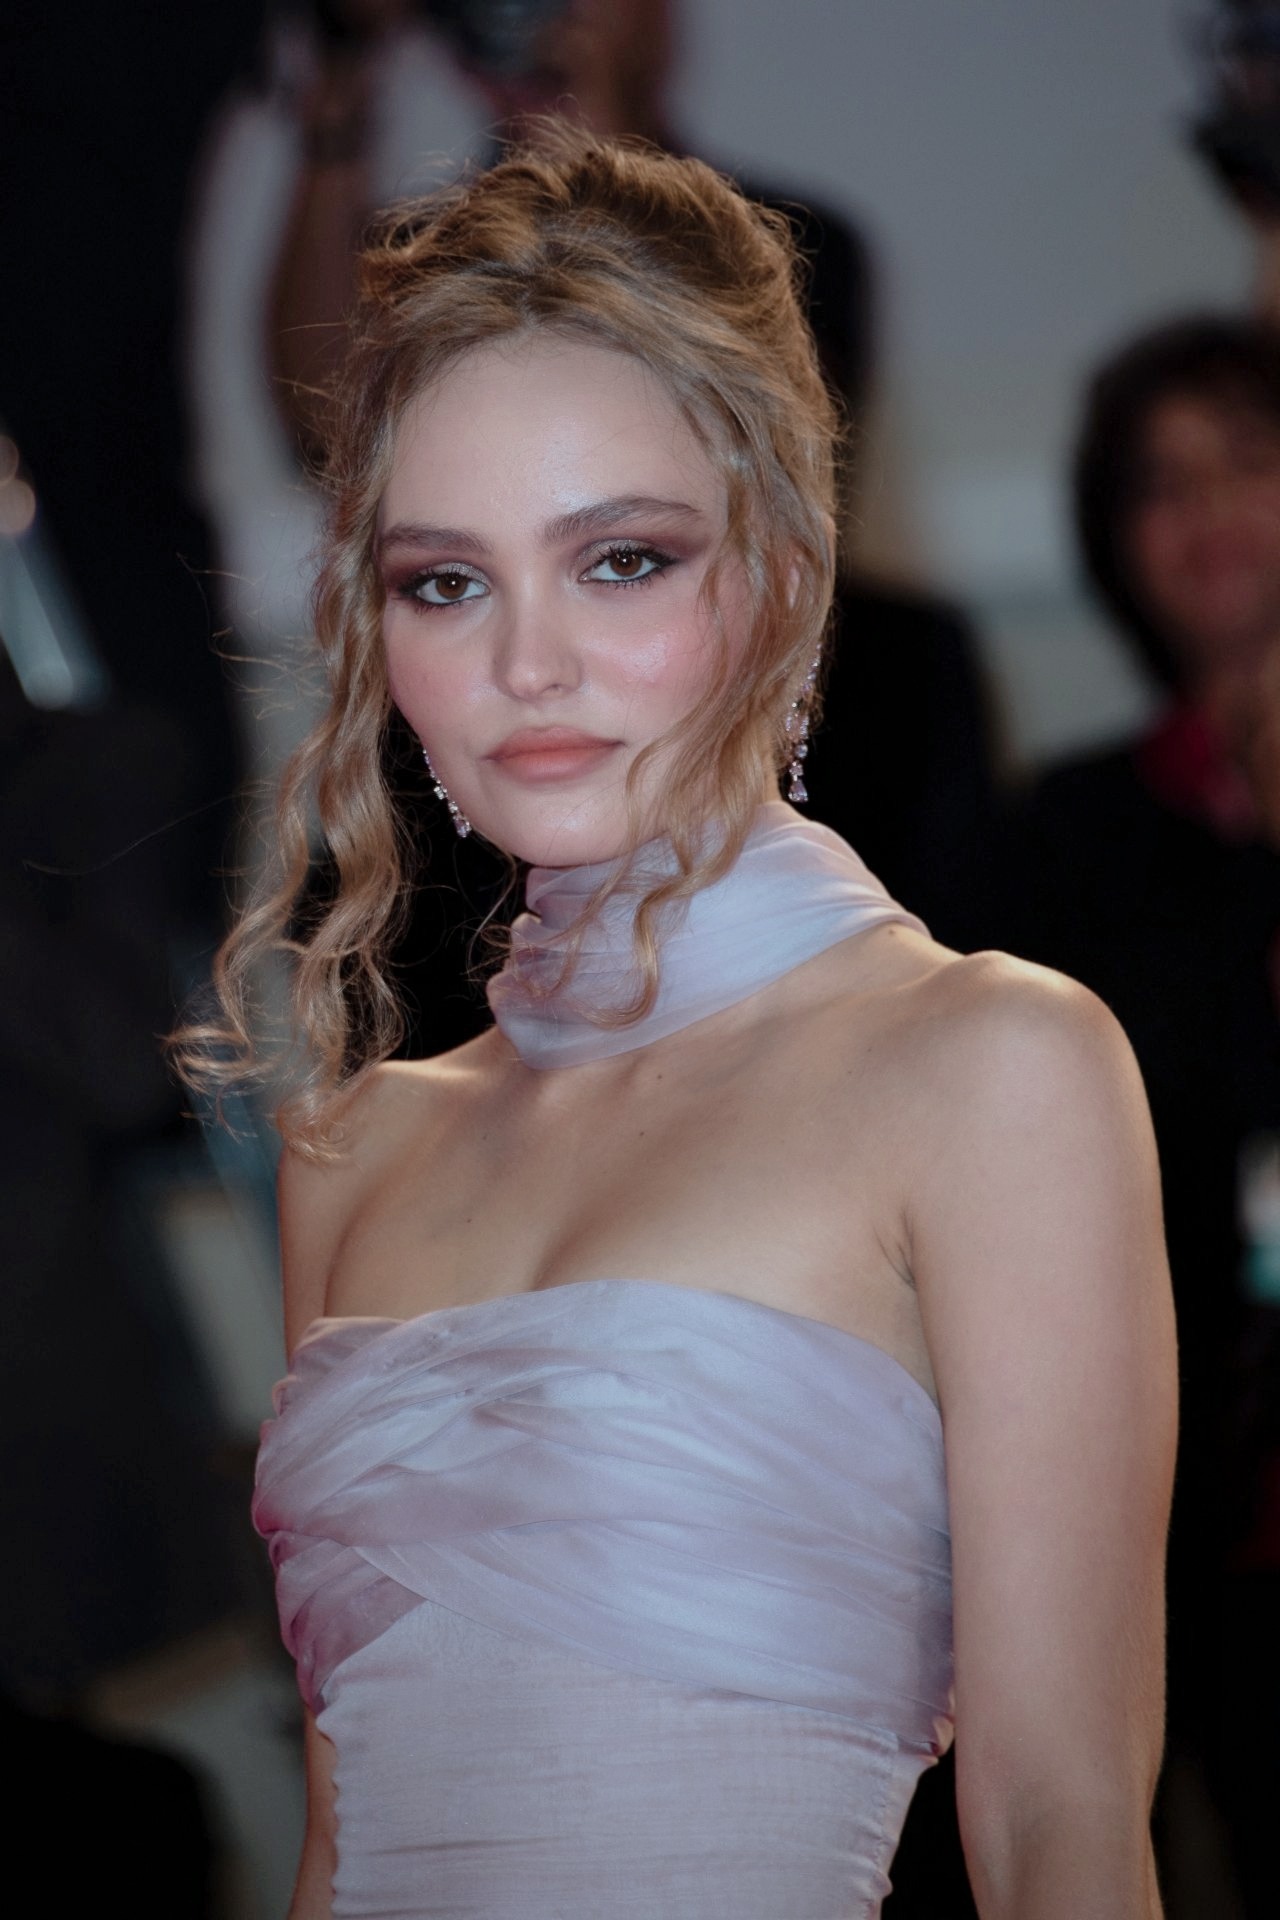 lily-rose depp — Lily-Rose Depp stuns on the red carpet for 'The...